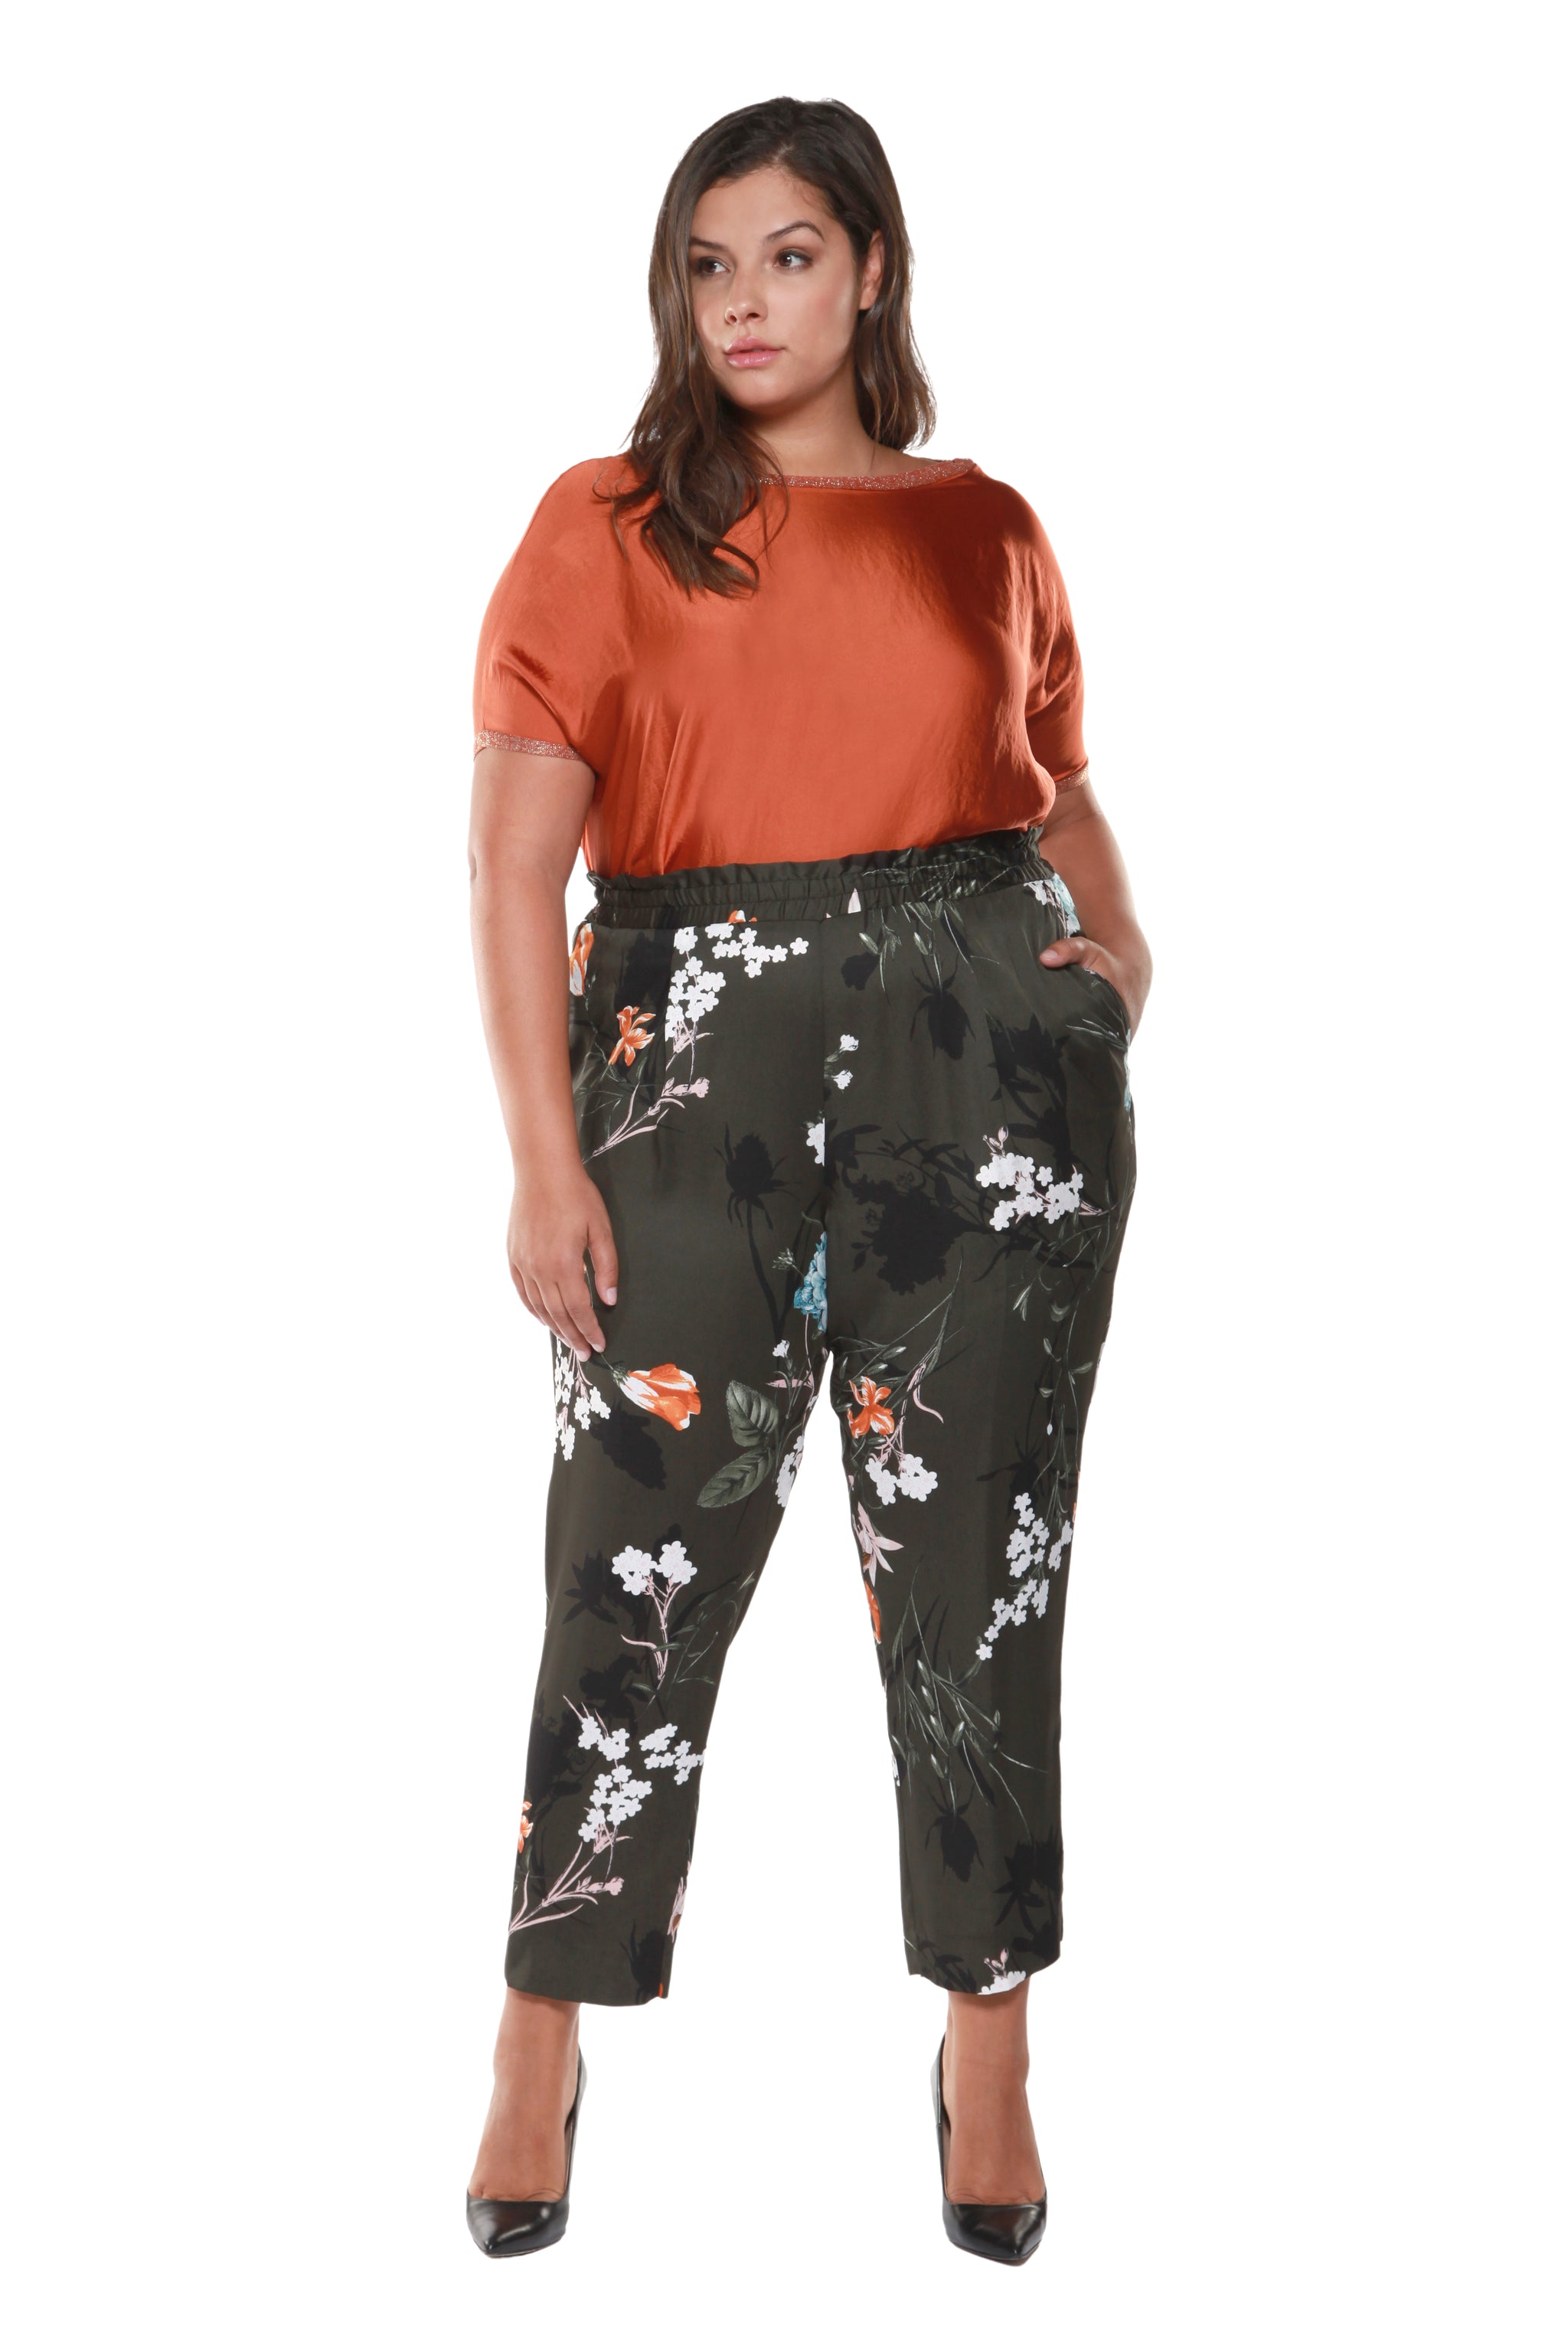 Plus Size Olive Green Floral Printed Pull On Pants